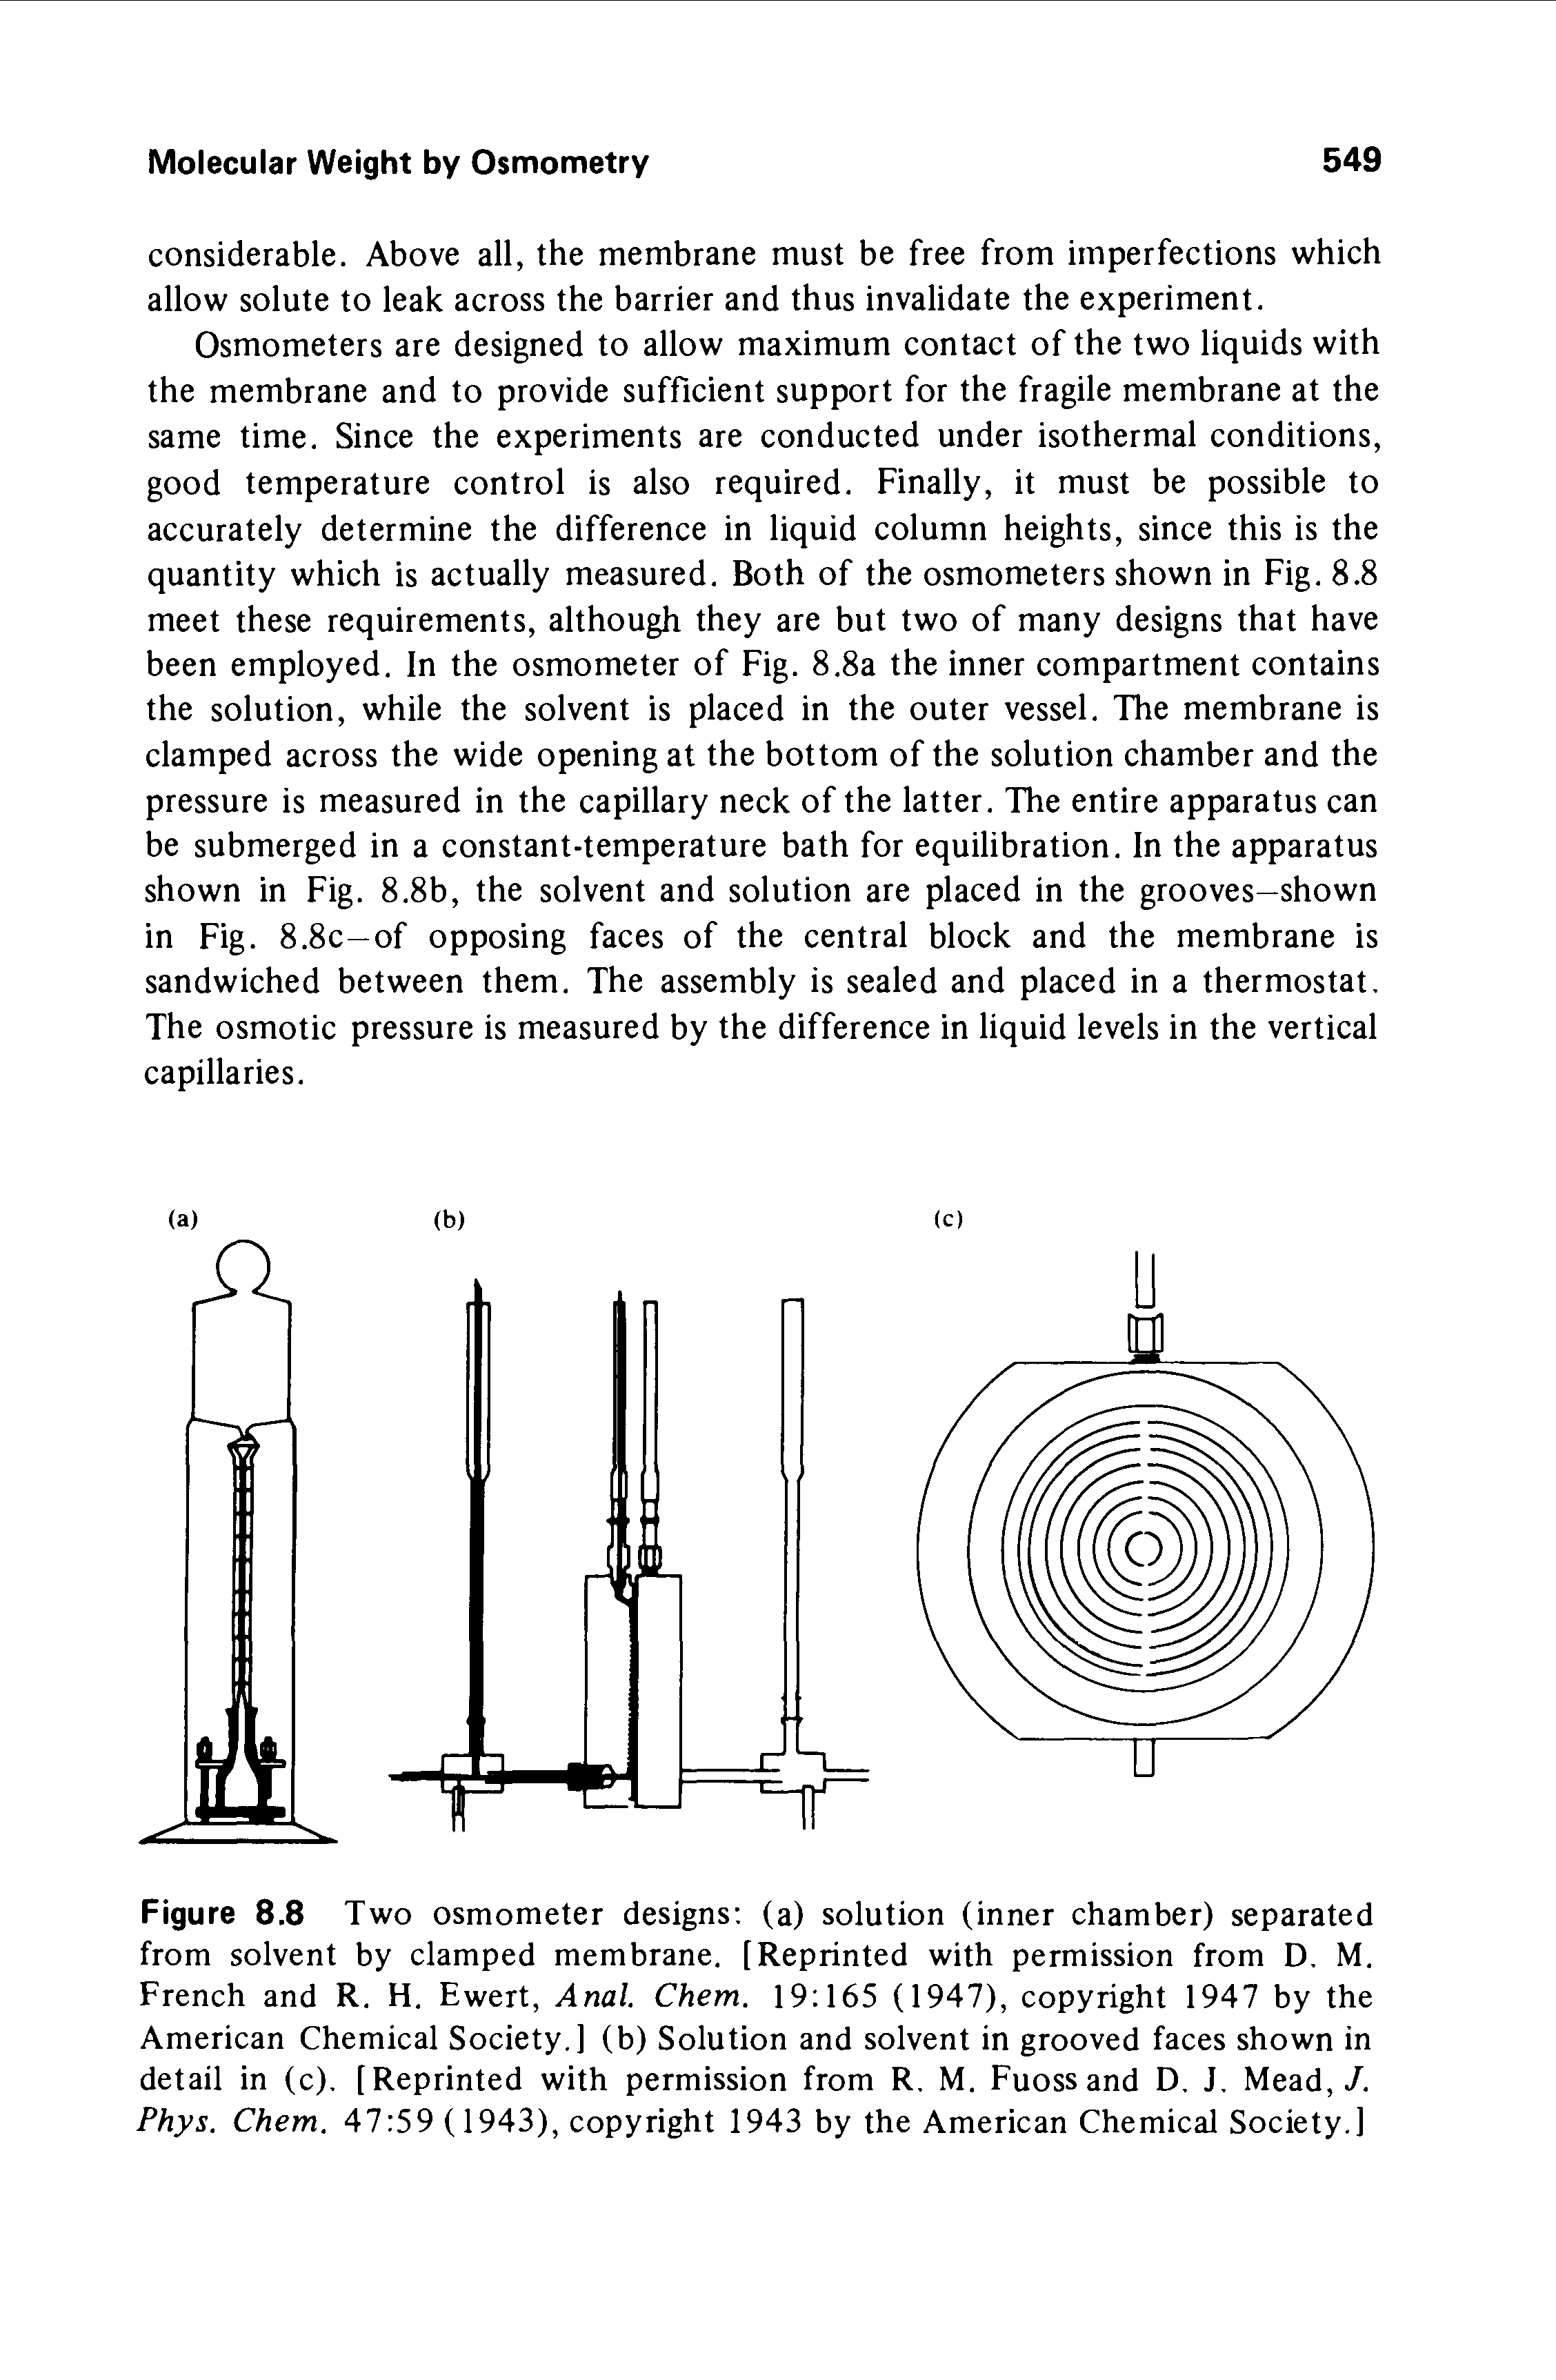 Figure 8.8 Two osmometer designs (a) solution (inner chamber) separated from solvent by clamped membrane. [Reprinted with permission from D, M. French and R. H. Ewert, Anal. Chem. 19 165 (1947), copyright 1947 by the American Chemical Society.] (b) Solution and solvent in grooved faces shown in detail in (c). [Reprinted with permission from R. M. Fuossand D. J. Mead,/. Phys. Chem. 47 59 (1943), copyright 1943 by the American Chemical Society.]...